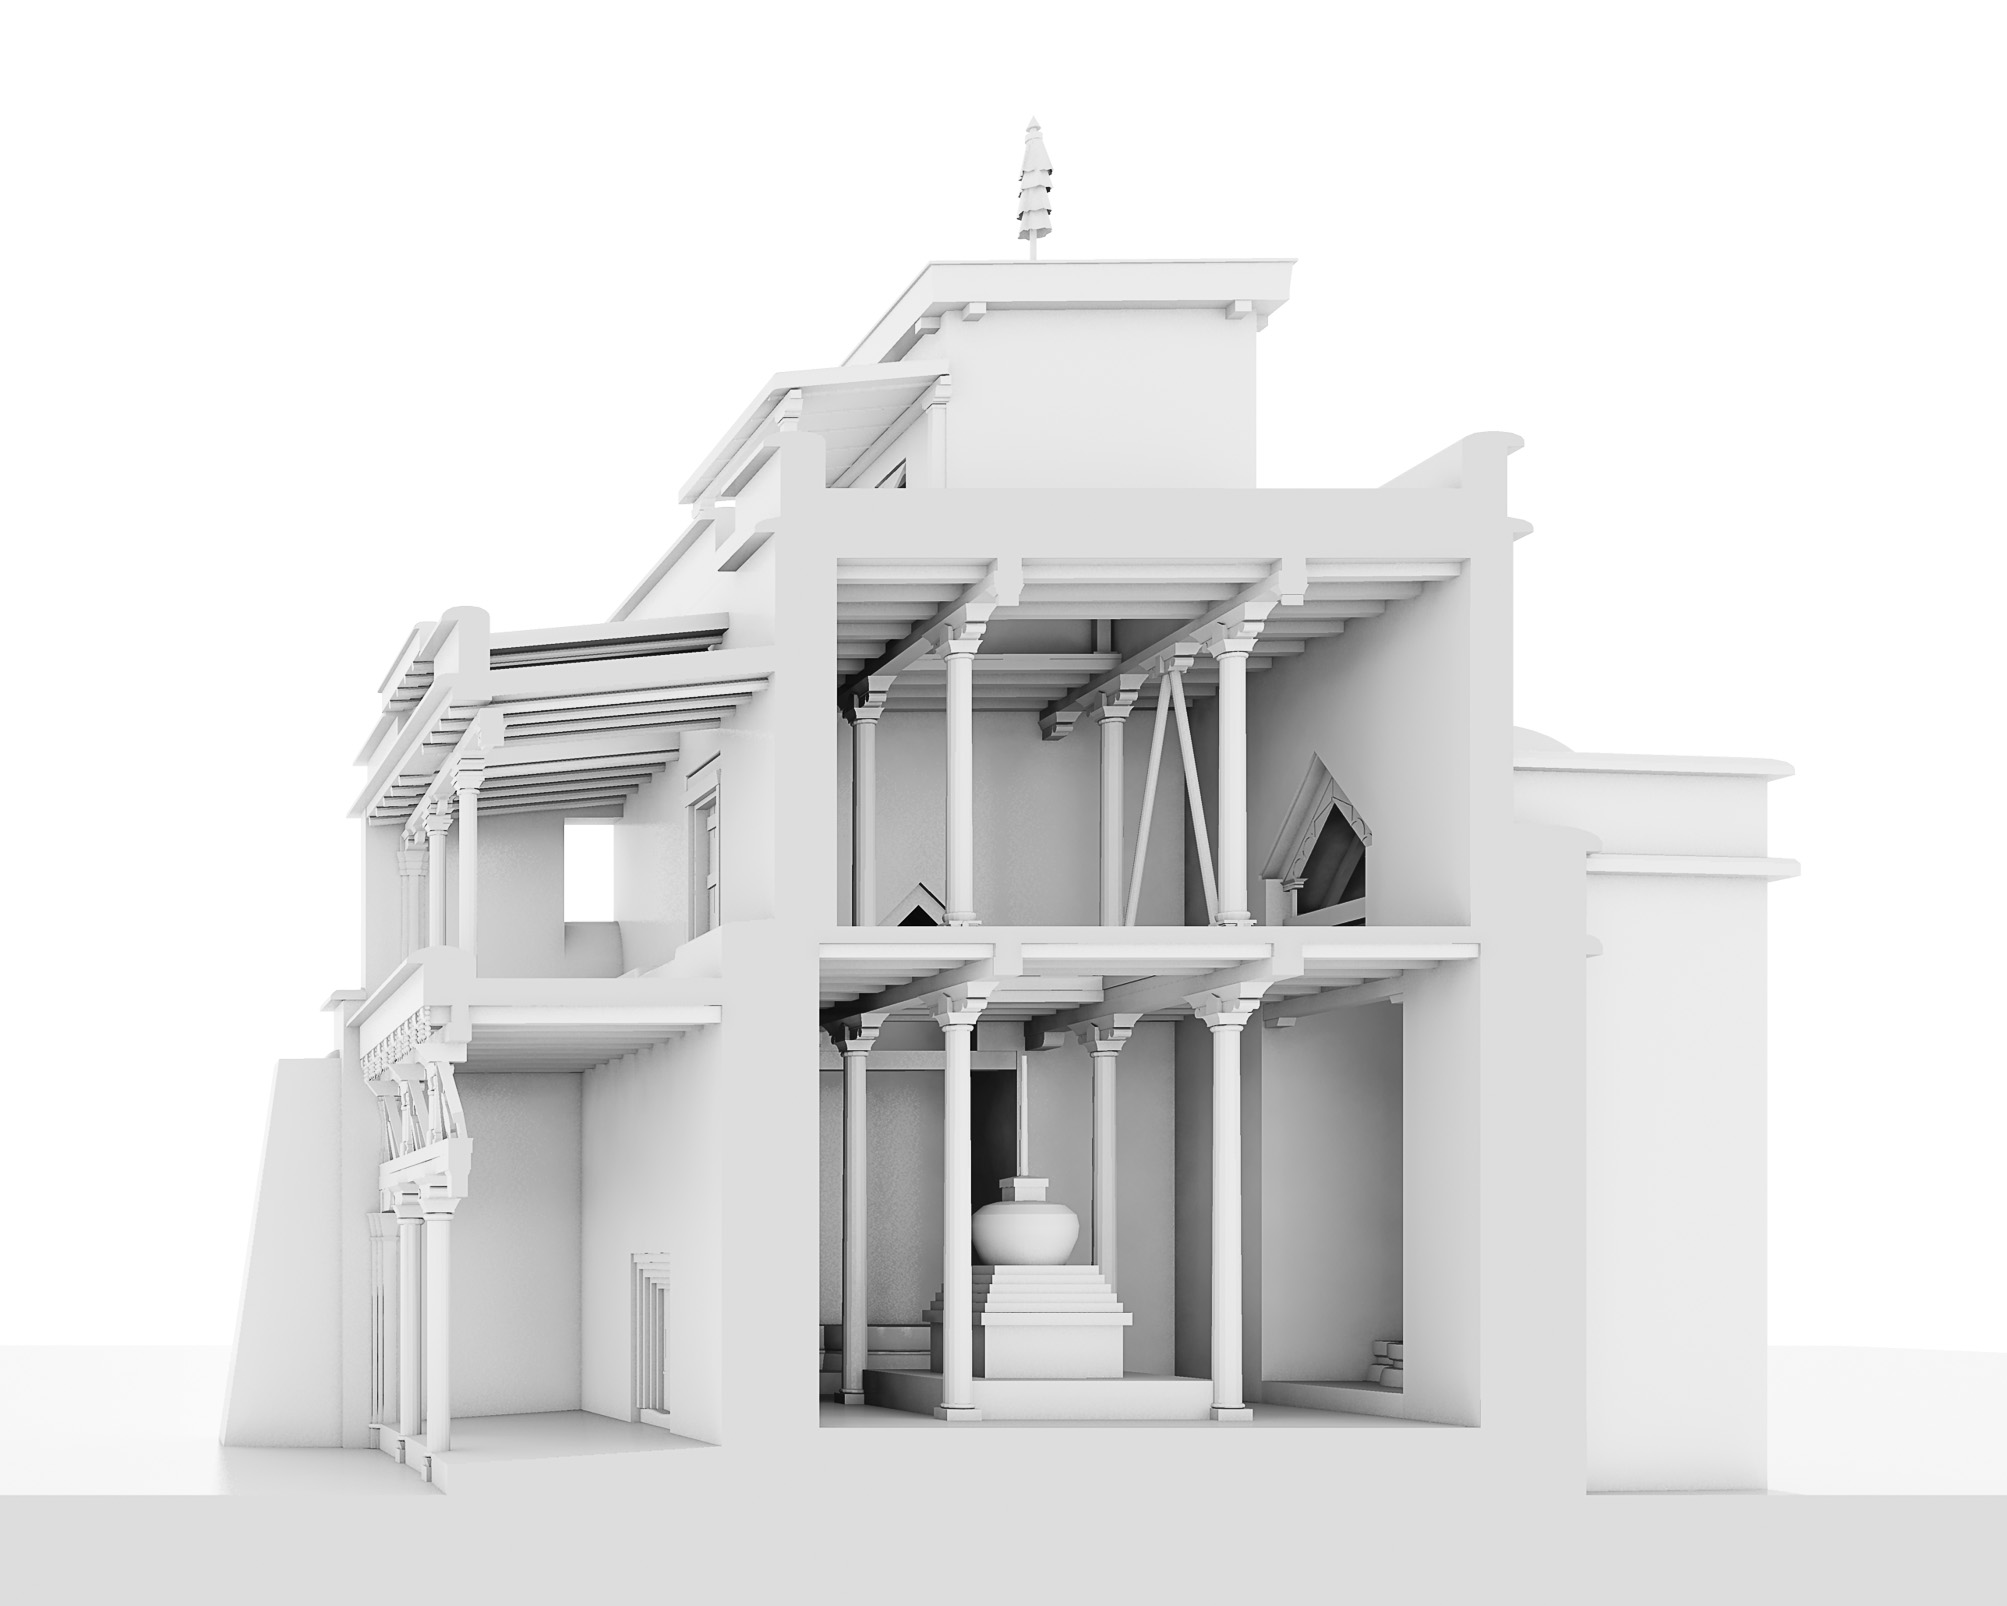 Three-dimensional, grayscale rendering of three-story temple with cross-section revealing interior structural and devotional elements